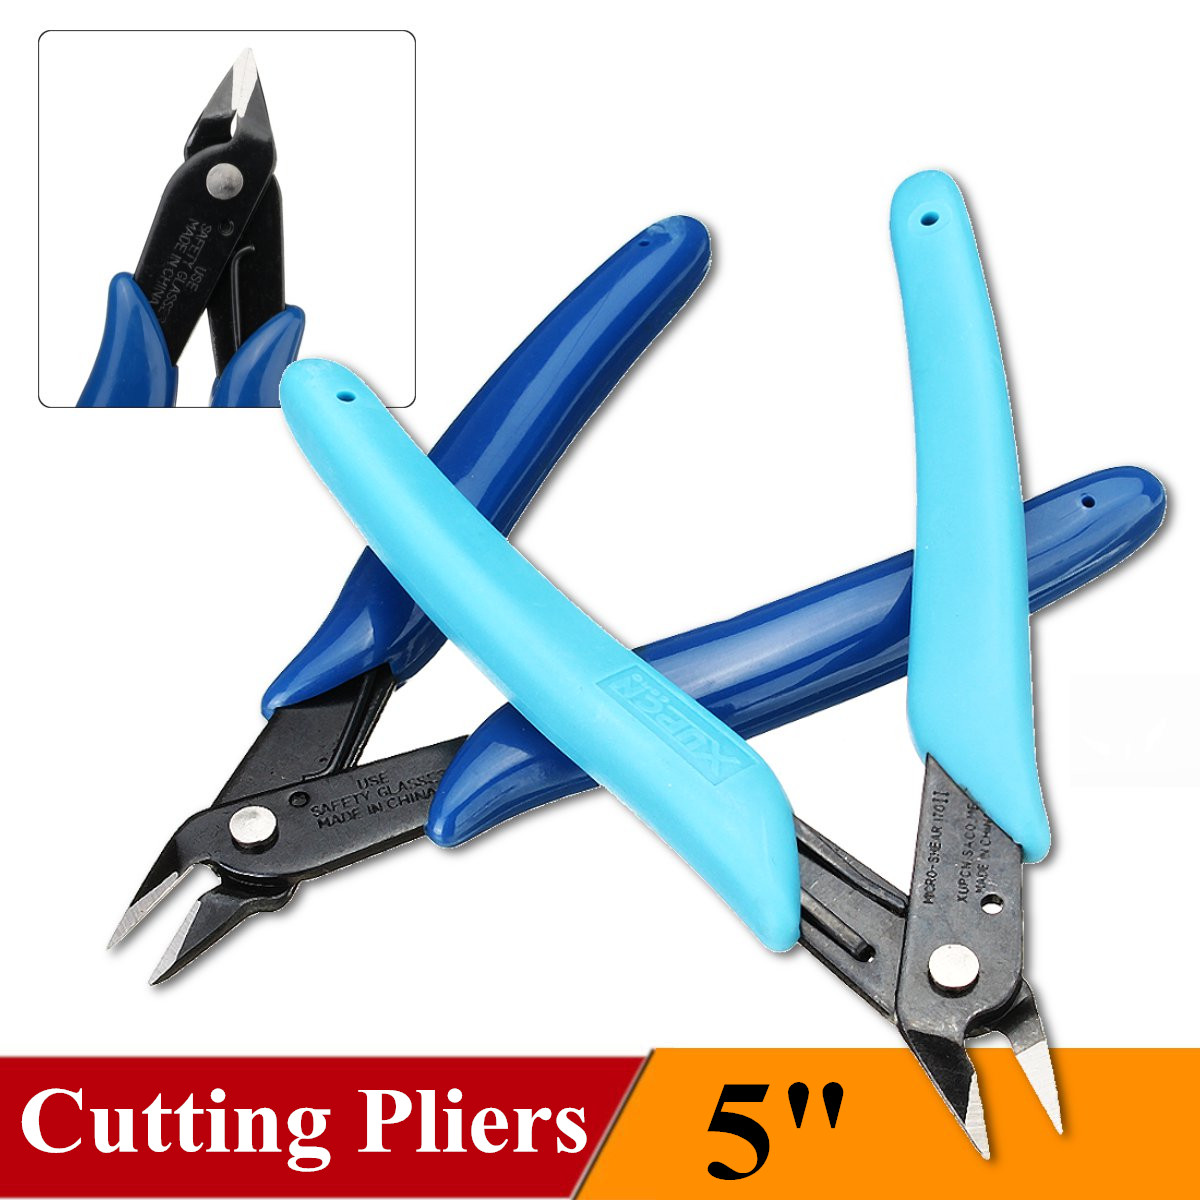 Pliers-Nipper-H-Practical-Electrical-Wire-Cable-Cutter-Cutting-Side-Snips-Flush-Pliers-Mini-Pliers-1371806-1